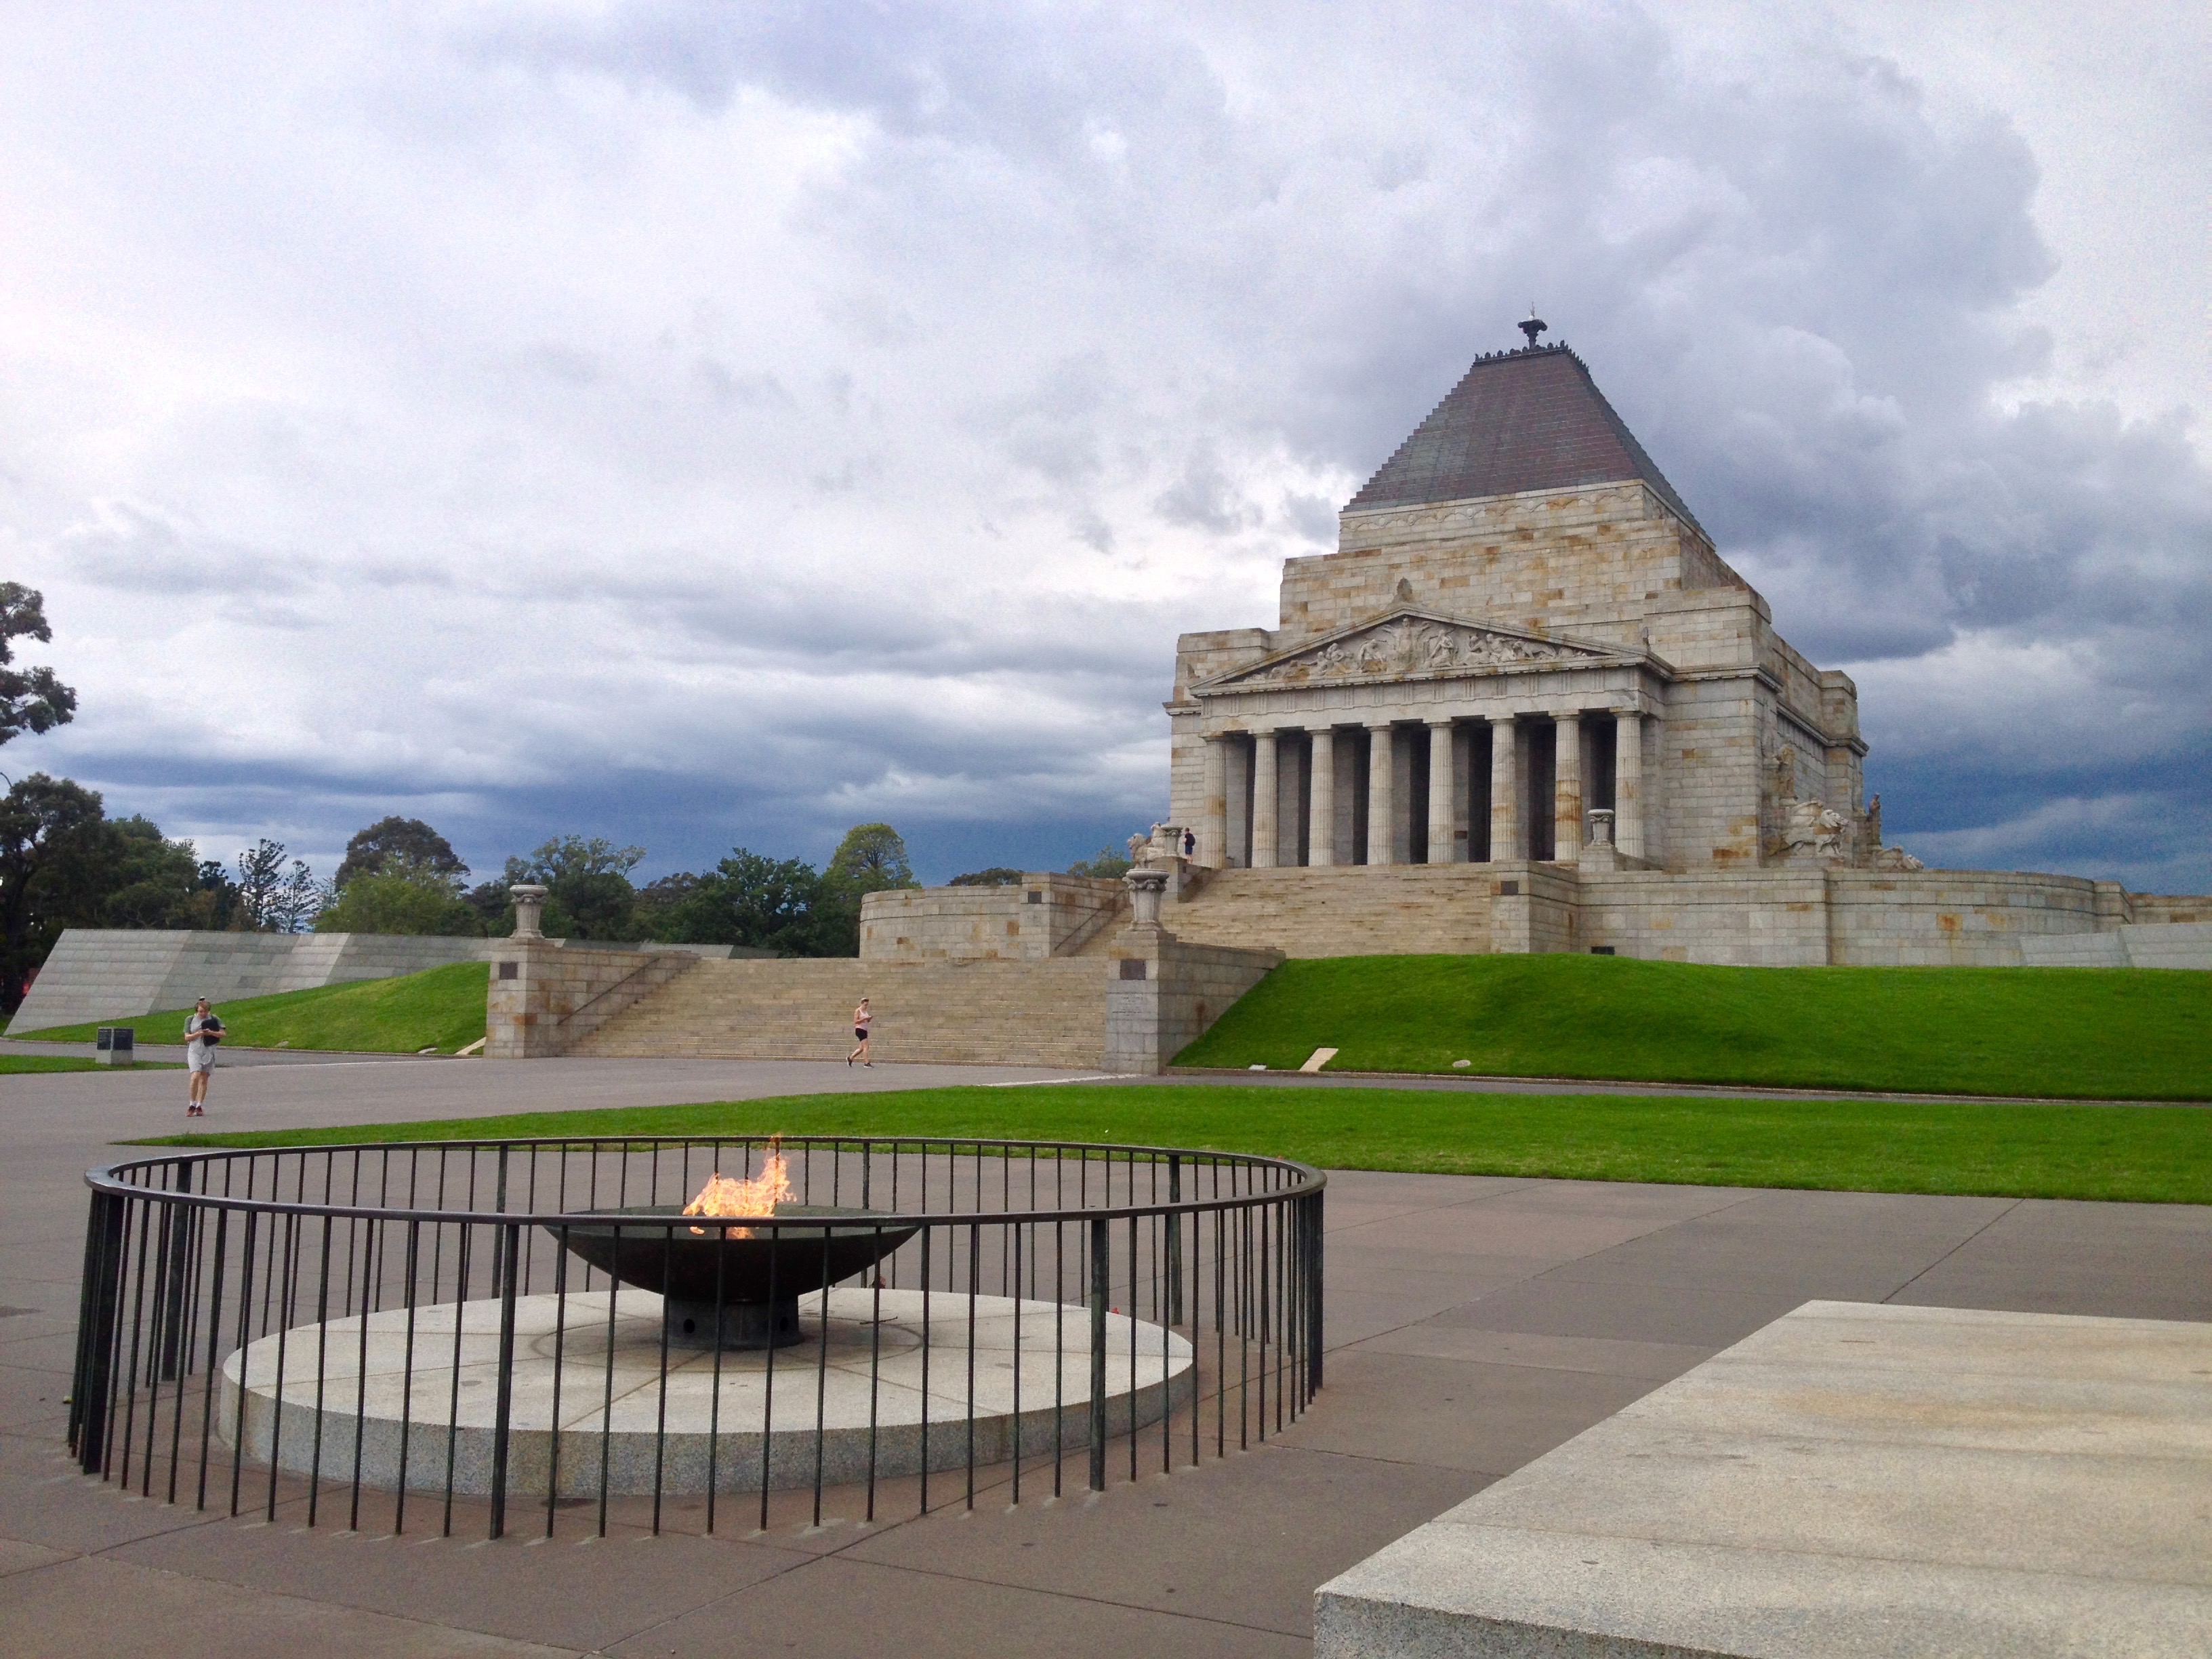 The memorial shrine in Melbourne. Very dramatic and impressive!